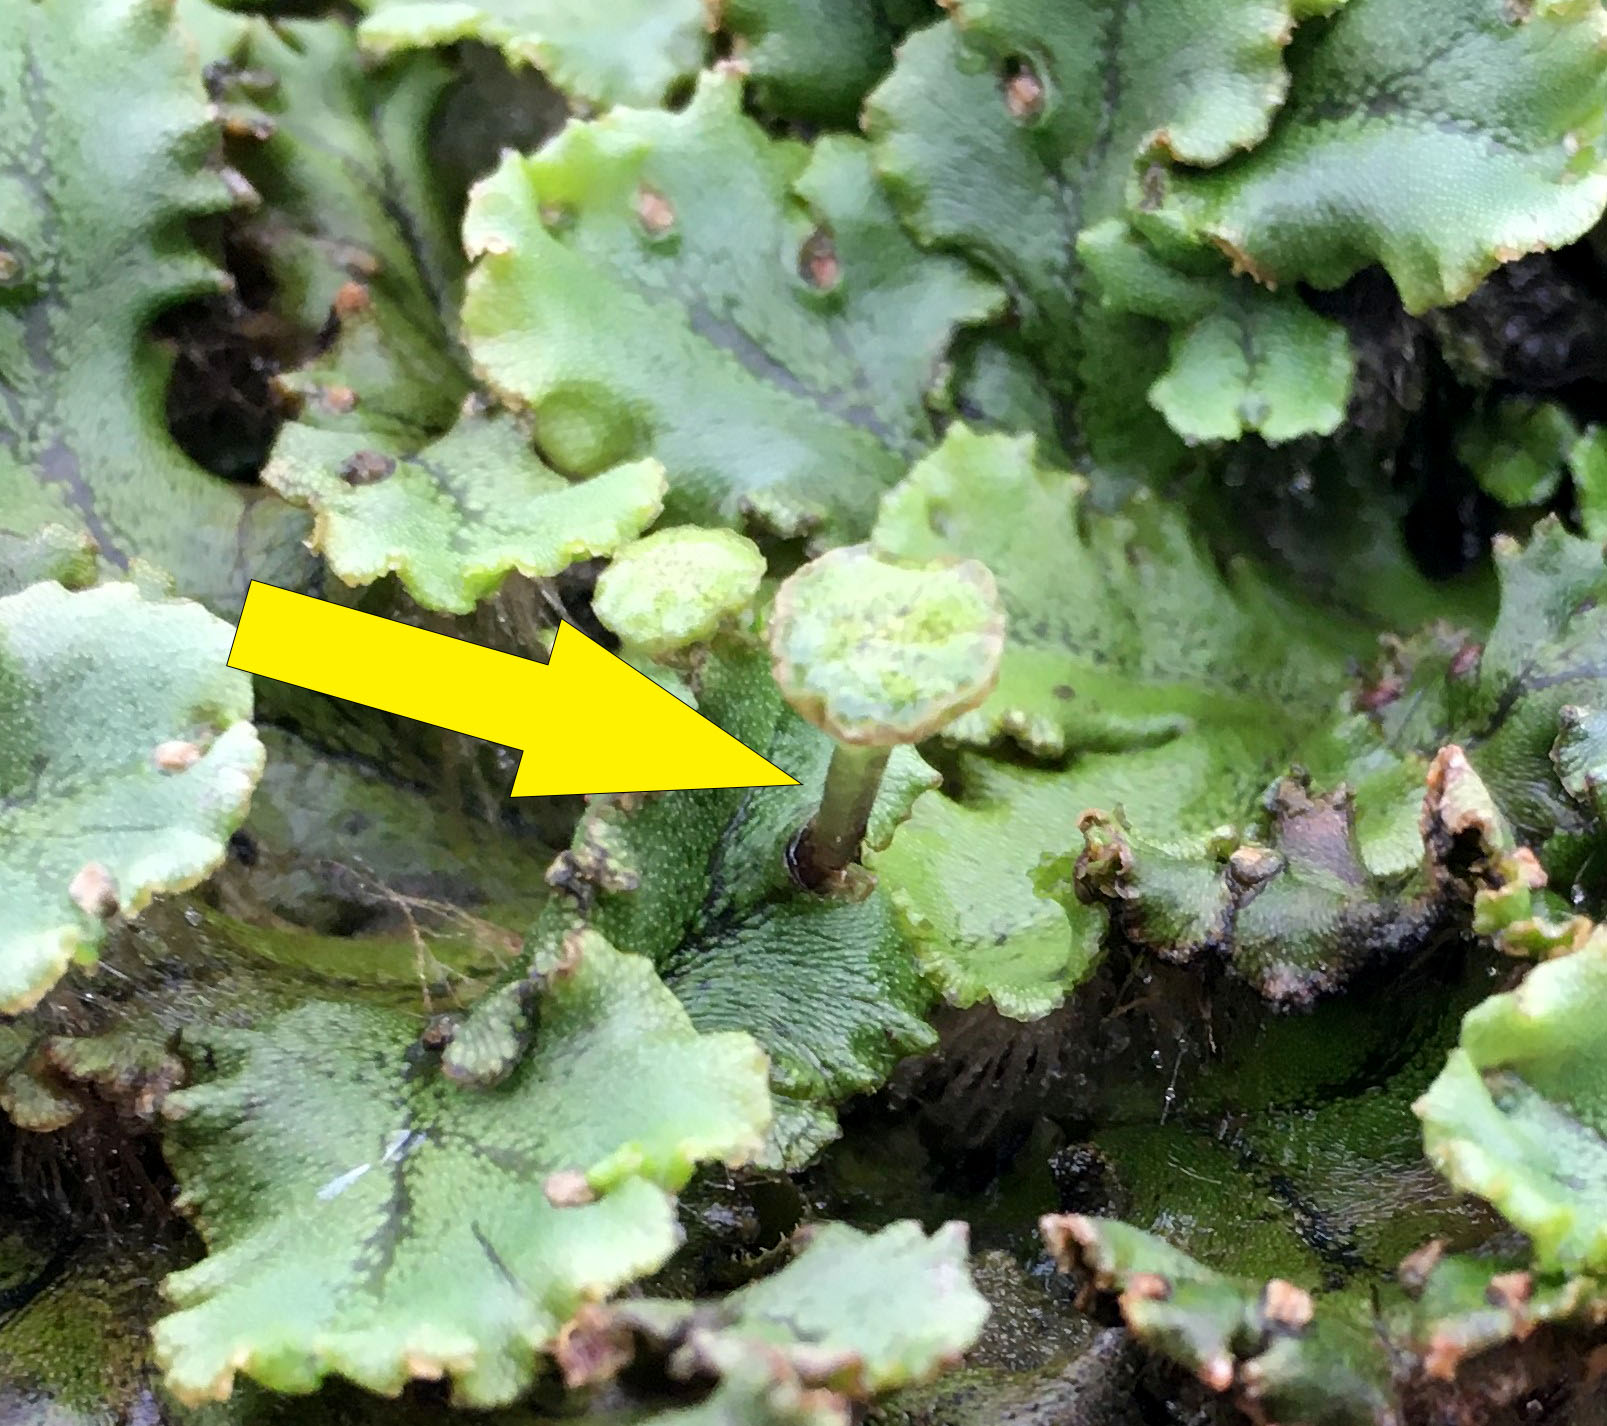 Arrows pointing to antheridia on plant